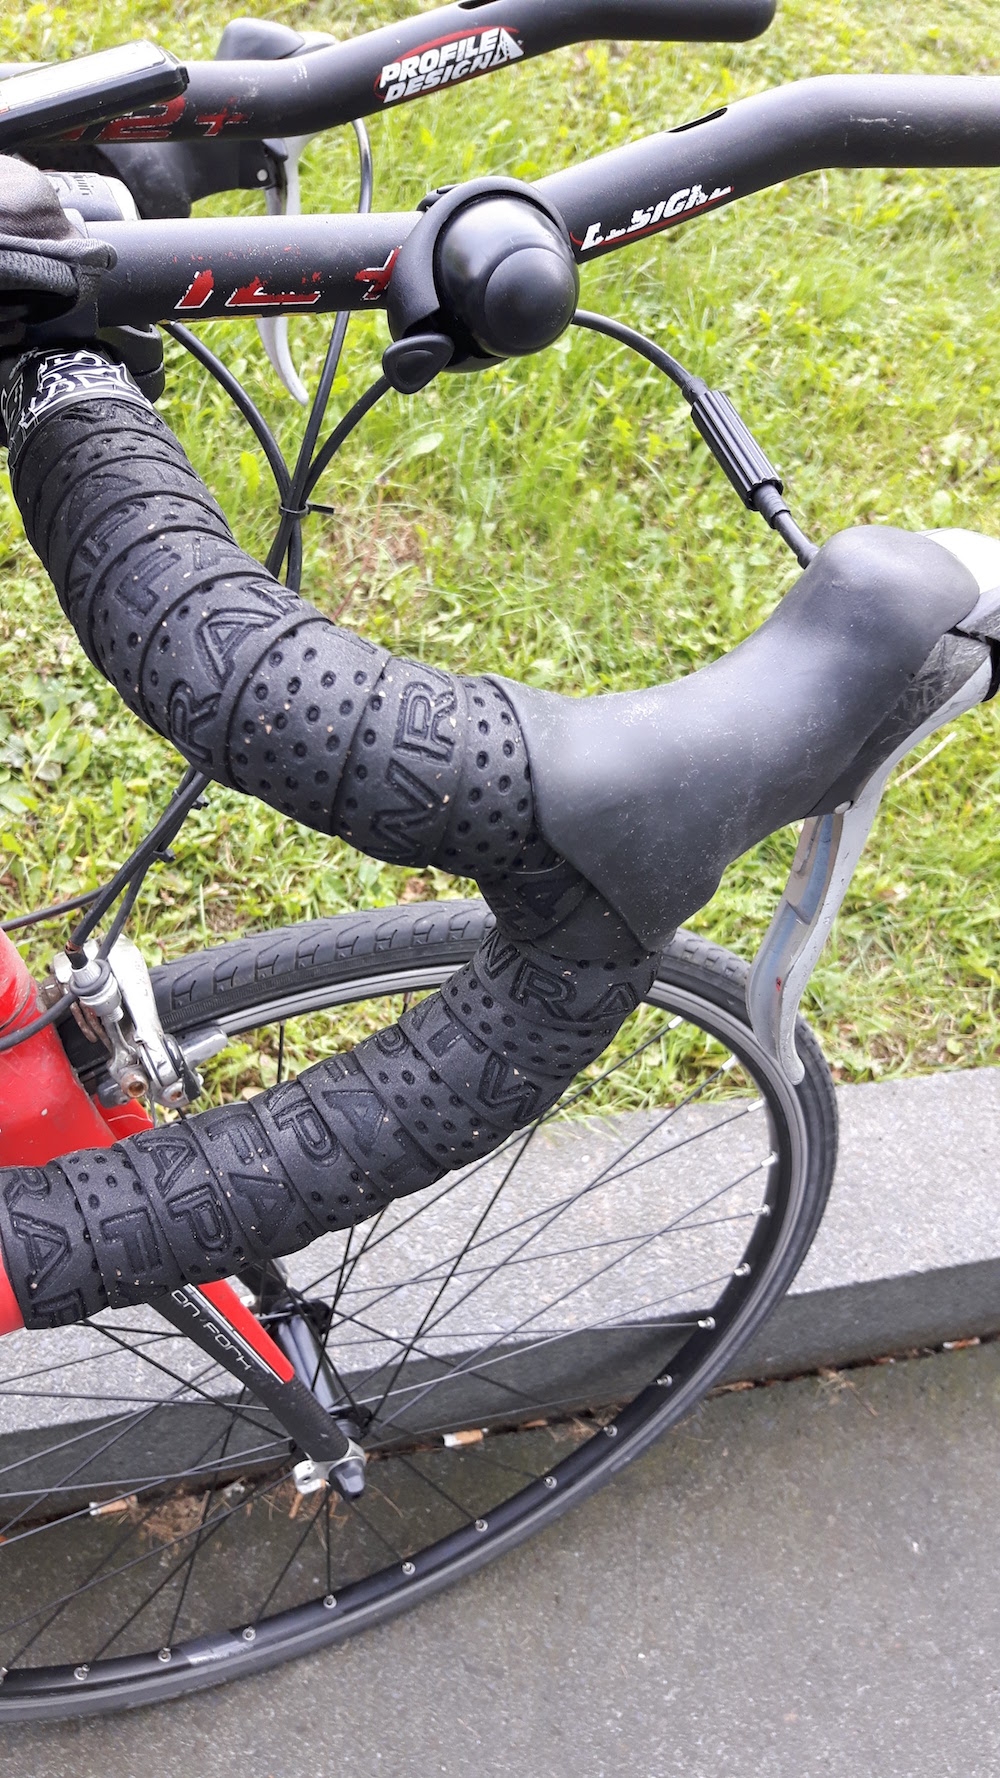 fat-wrap tape on handle bar wrong way